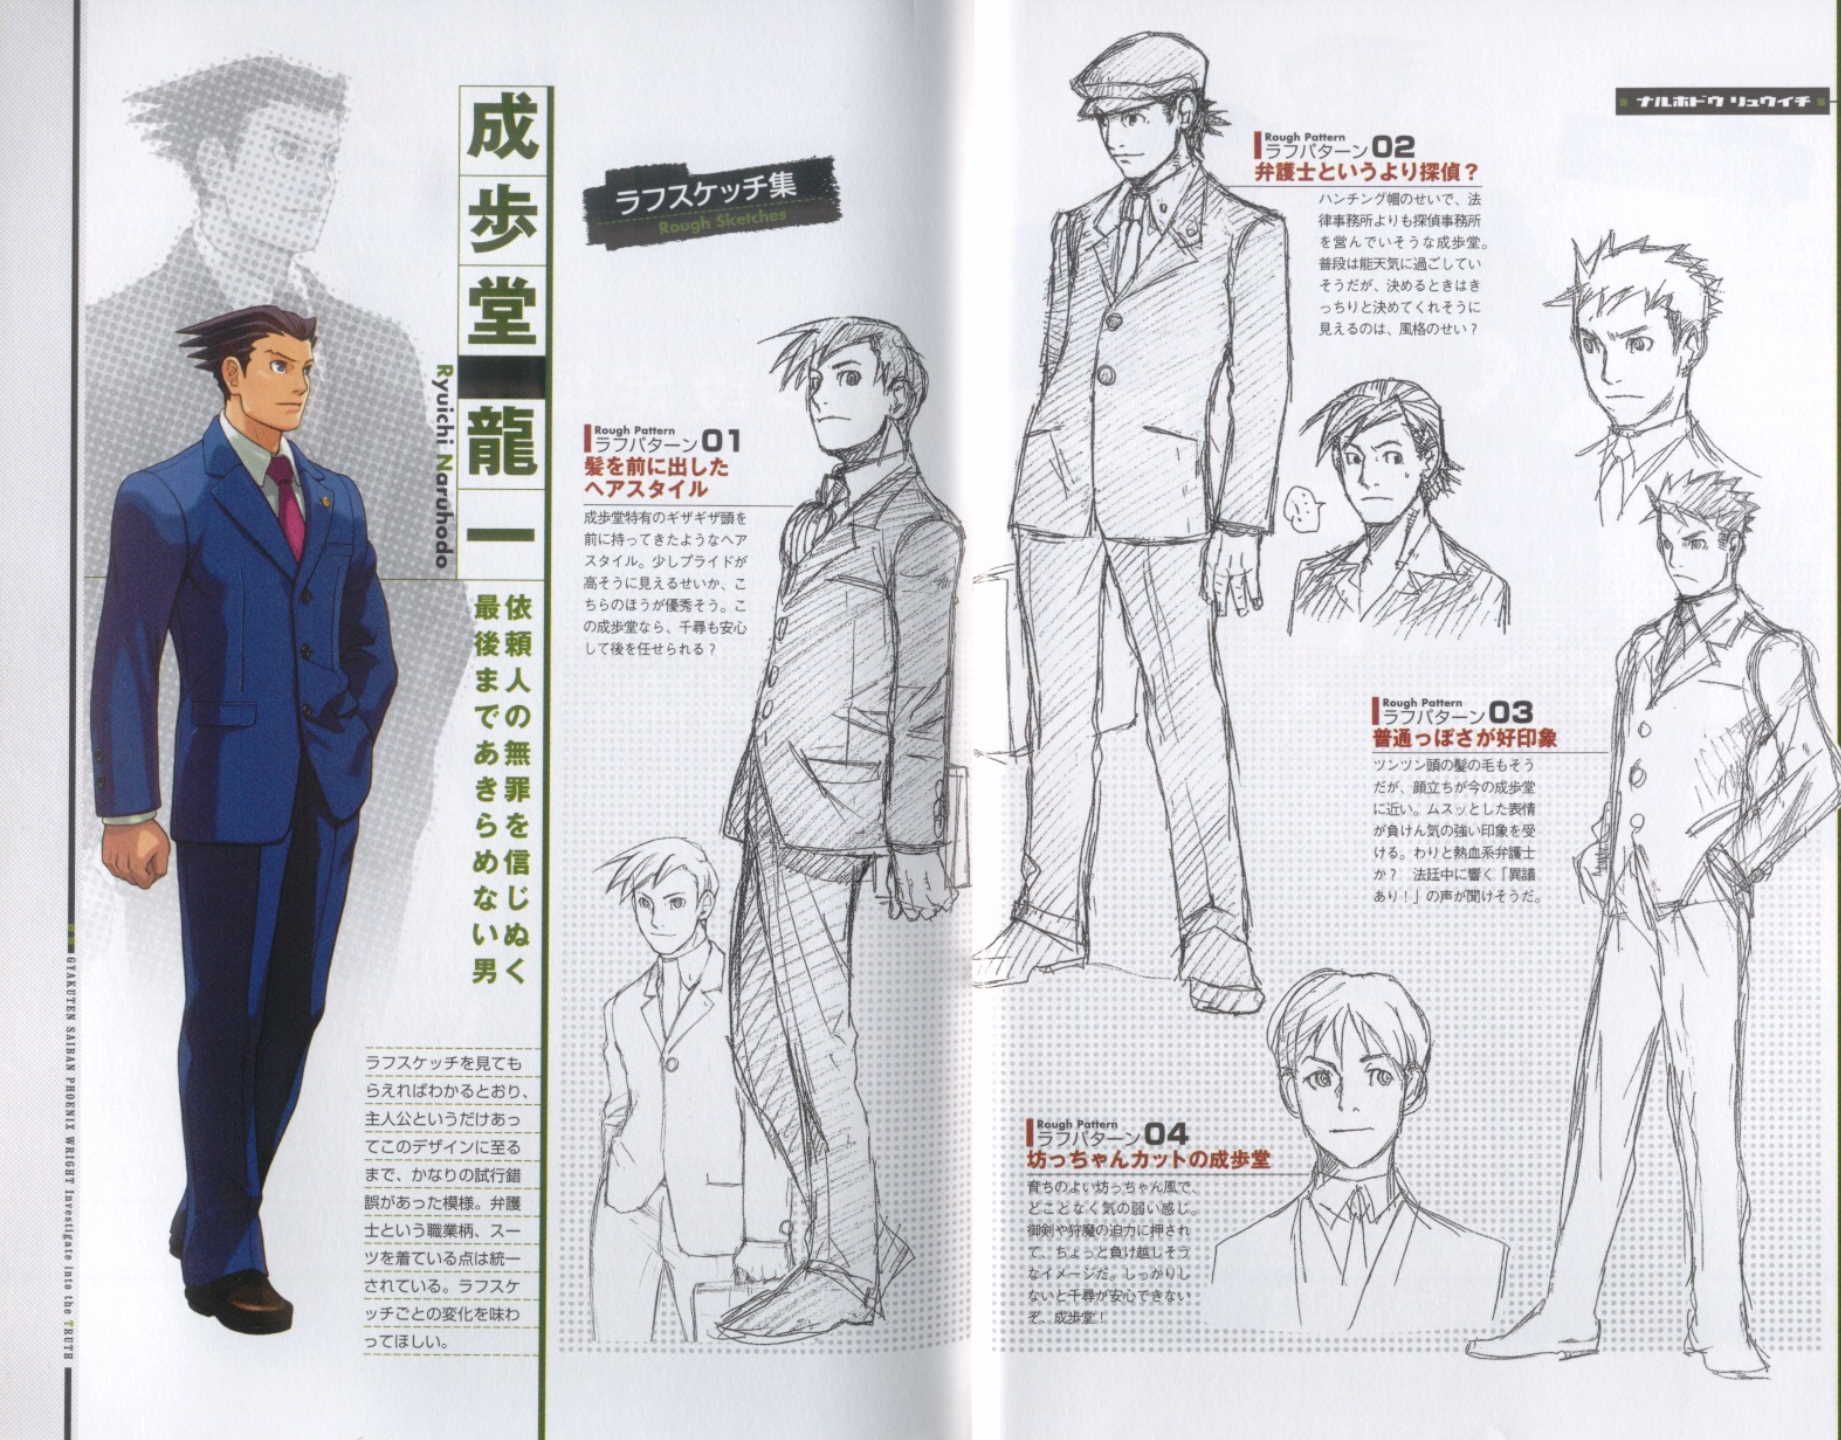 Phoenix Wright Ace Attorney Character Concept Art